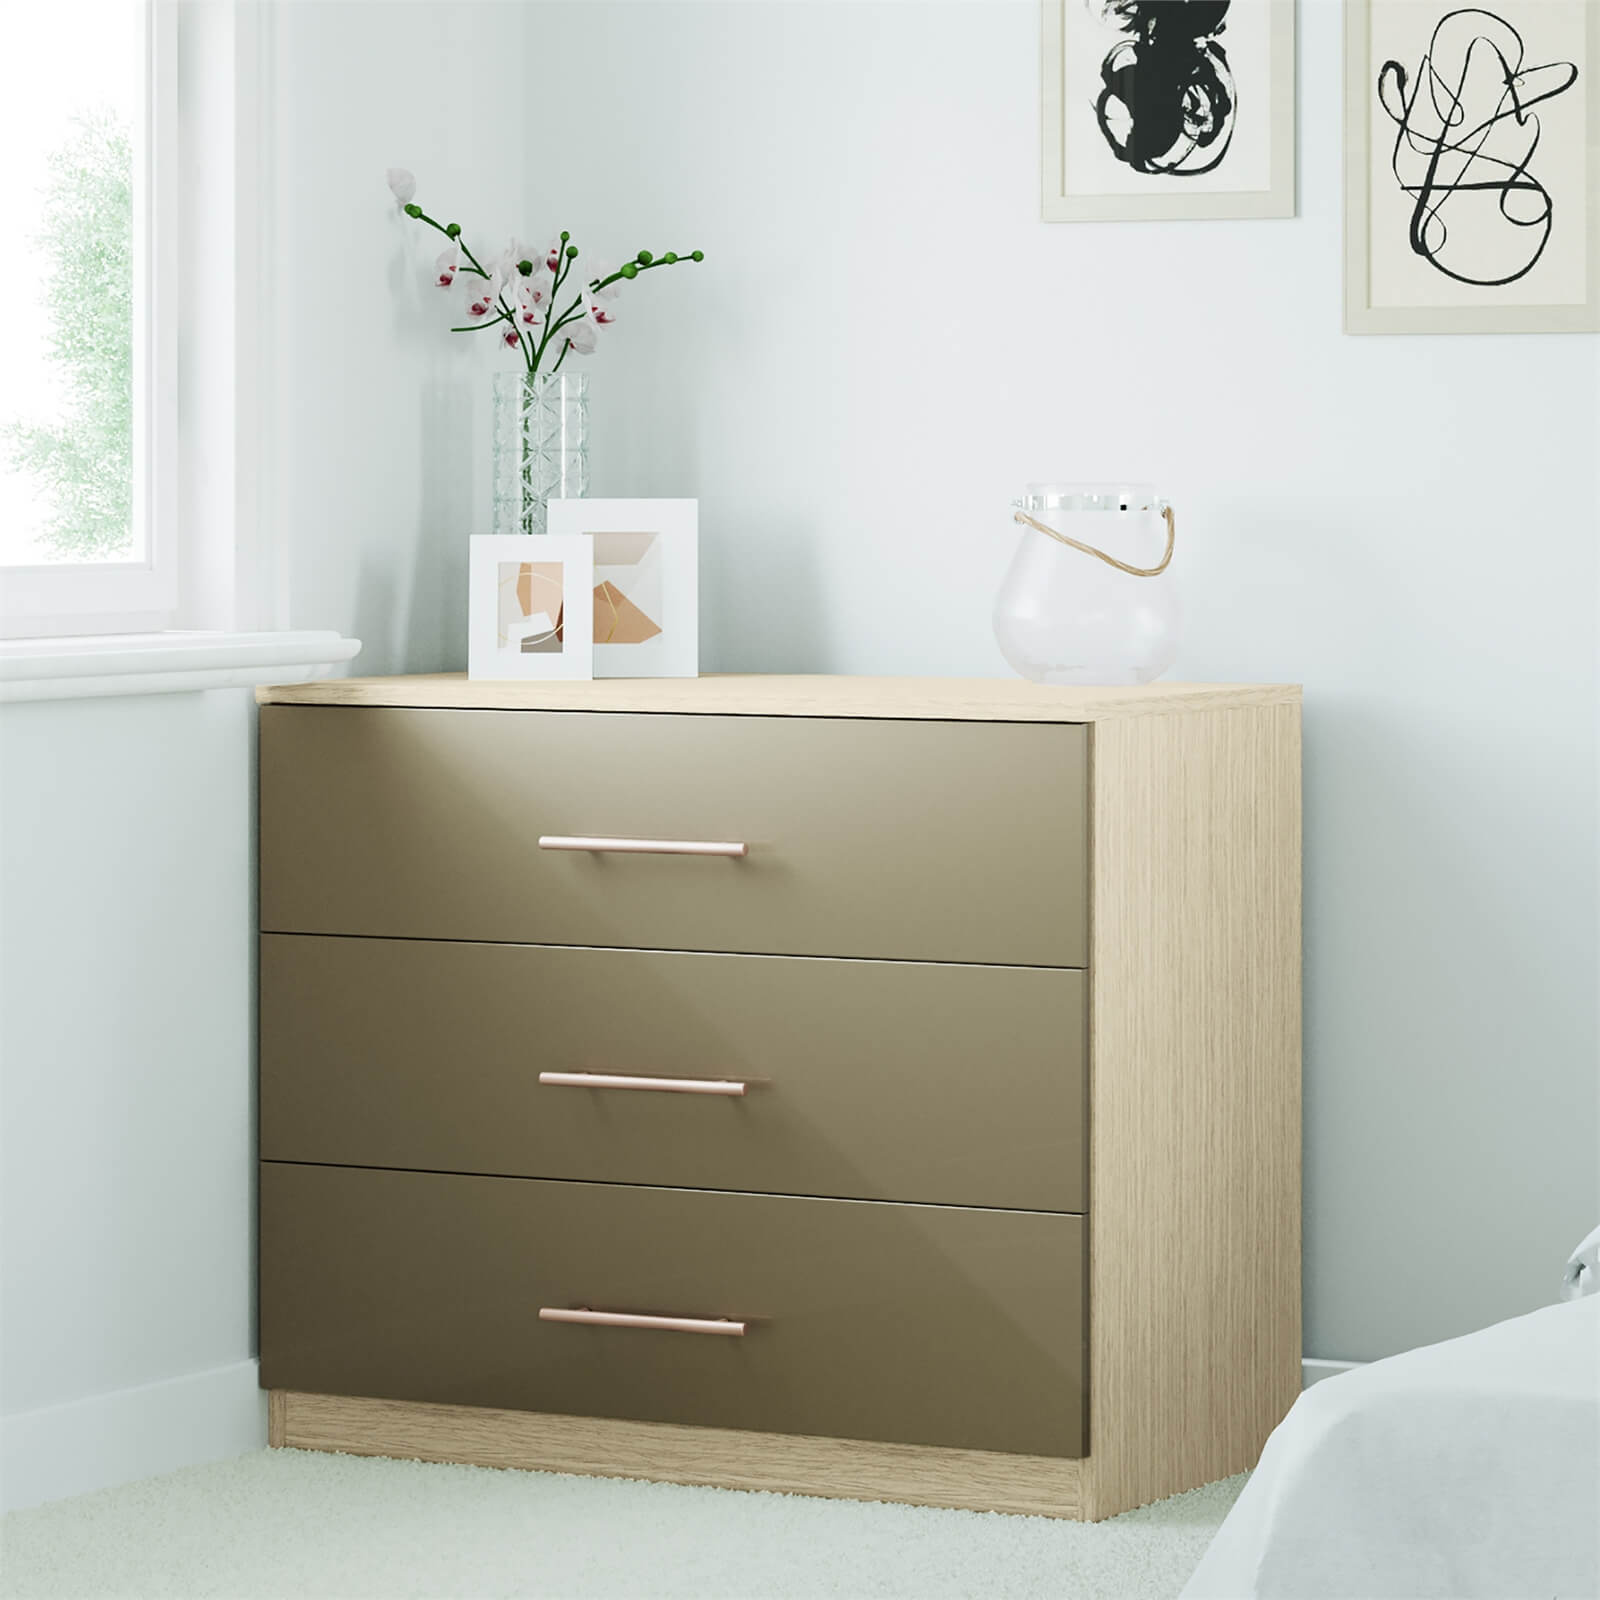 Fitted Bedroom Slab 3 Drawer Chest - Champagne